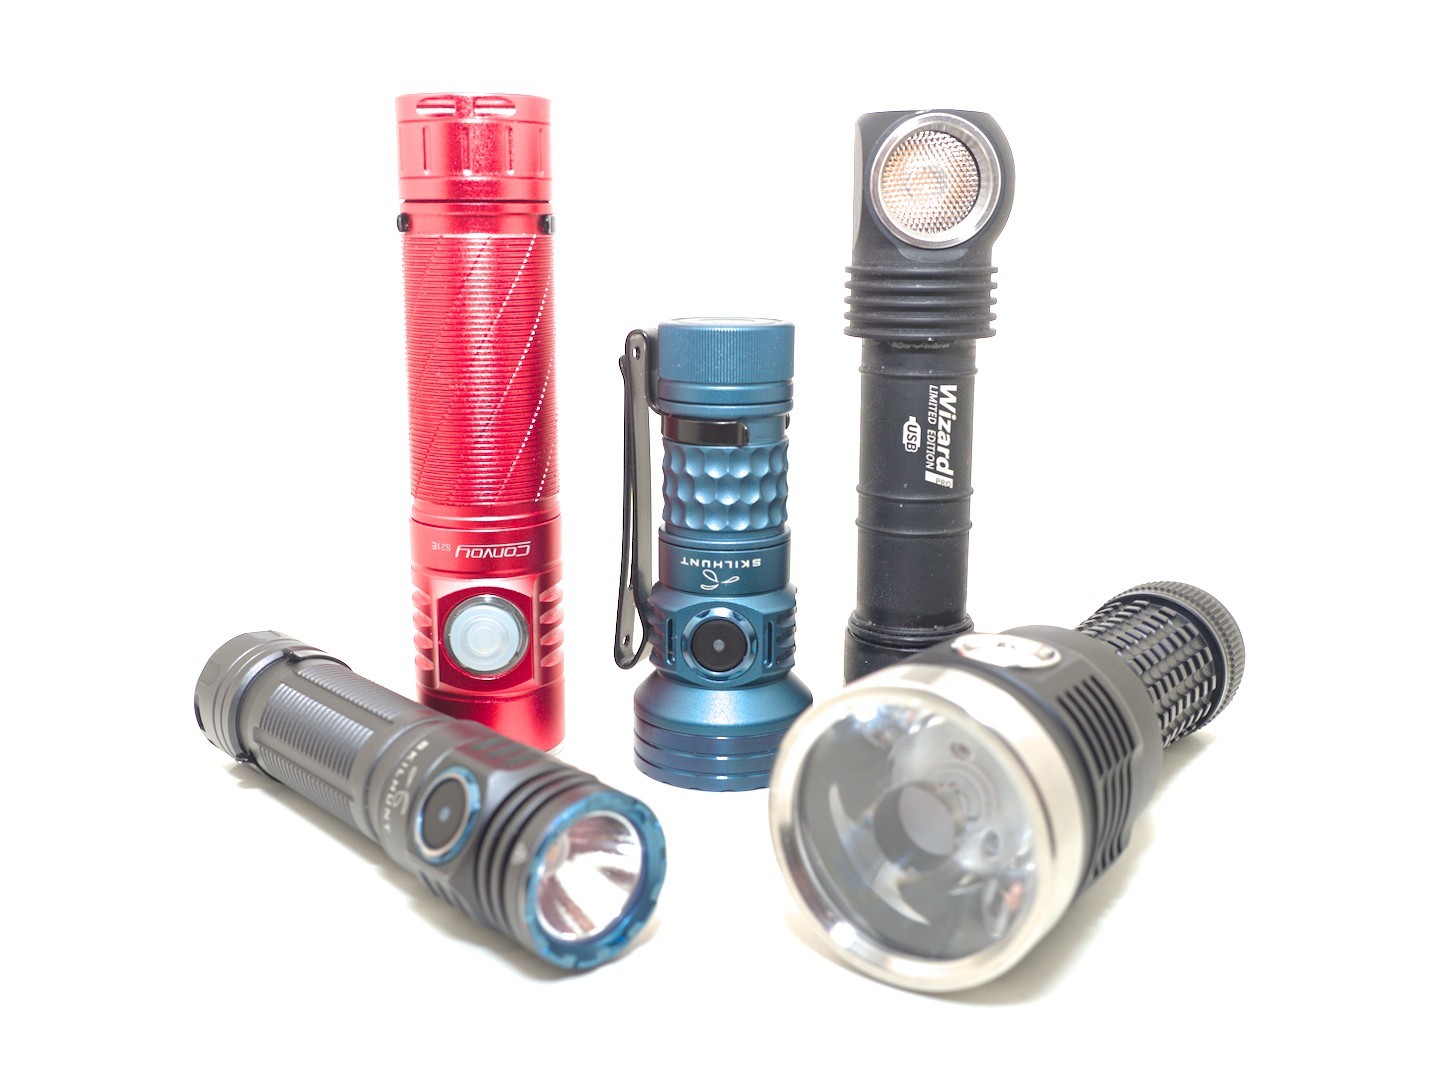 Five flashlights from various brands against a white background